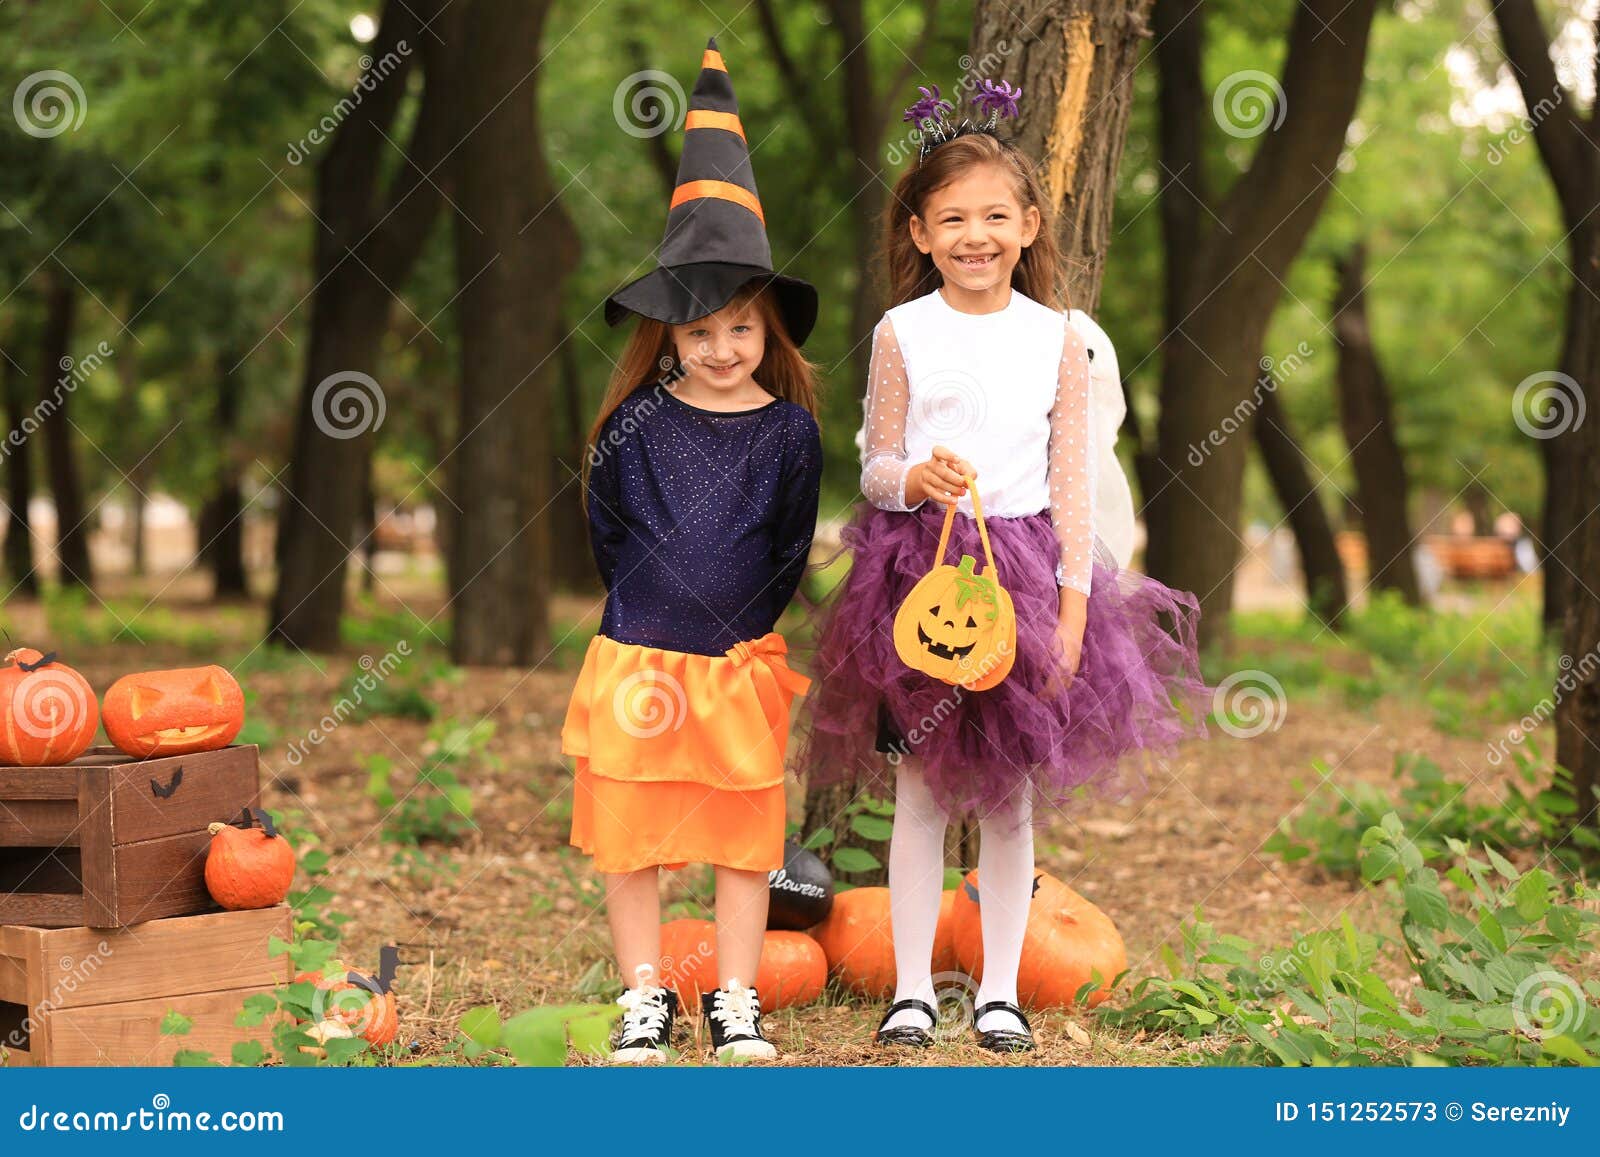 Cute Little Girls Dressed for Halloween in Autumn Park Stock Image ...